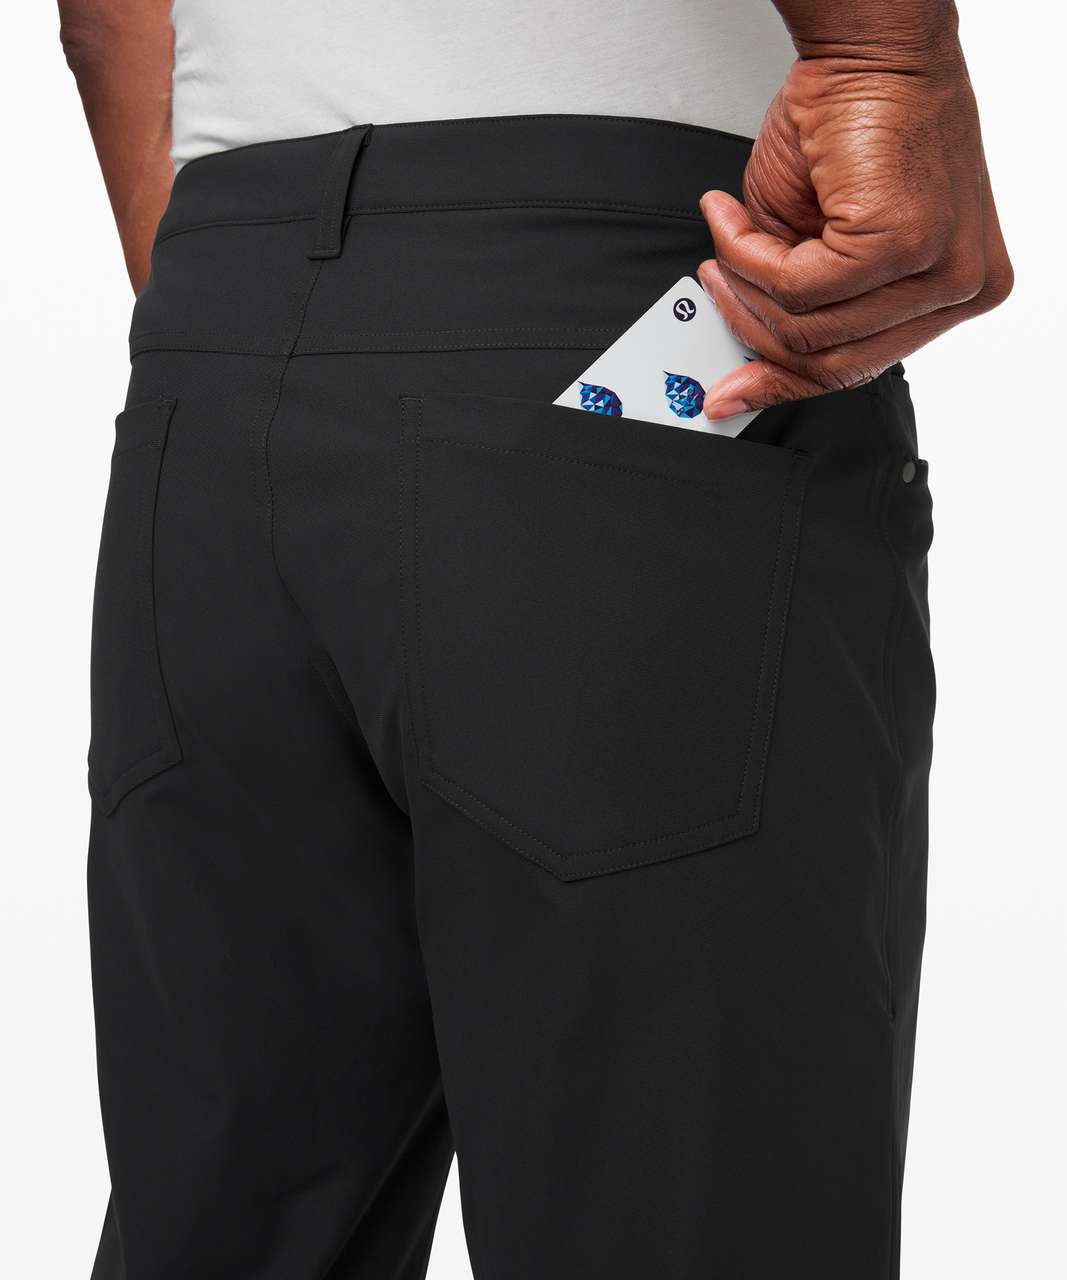 Lululemon ABC Pant Classic *Warpstreme 30" - Obsidian (First Release)